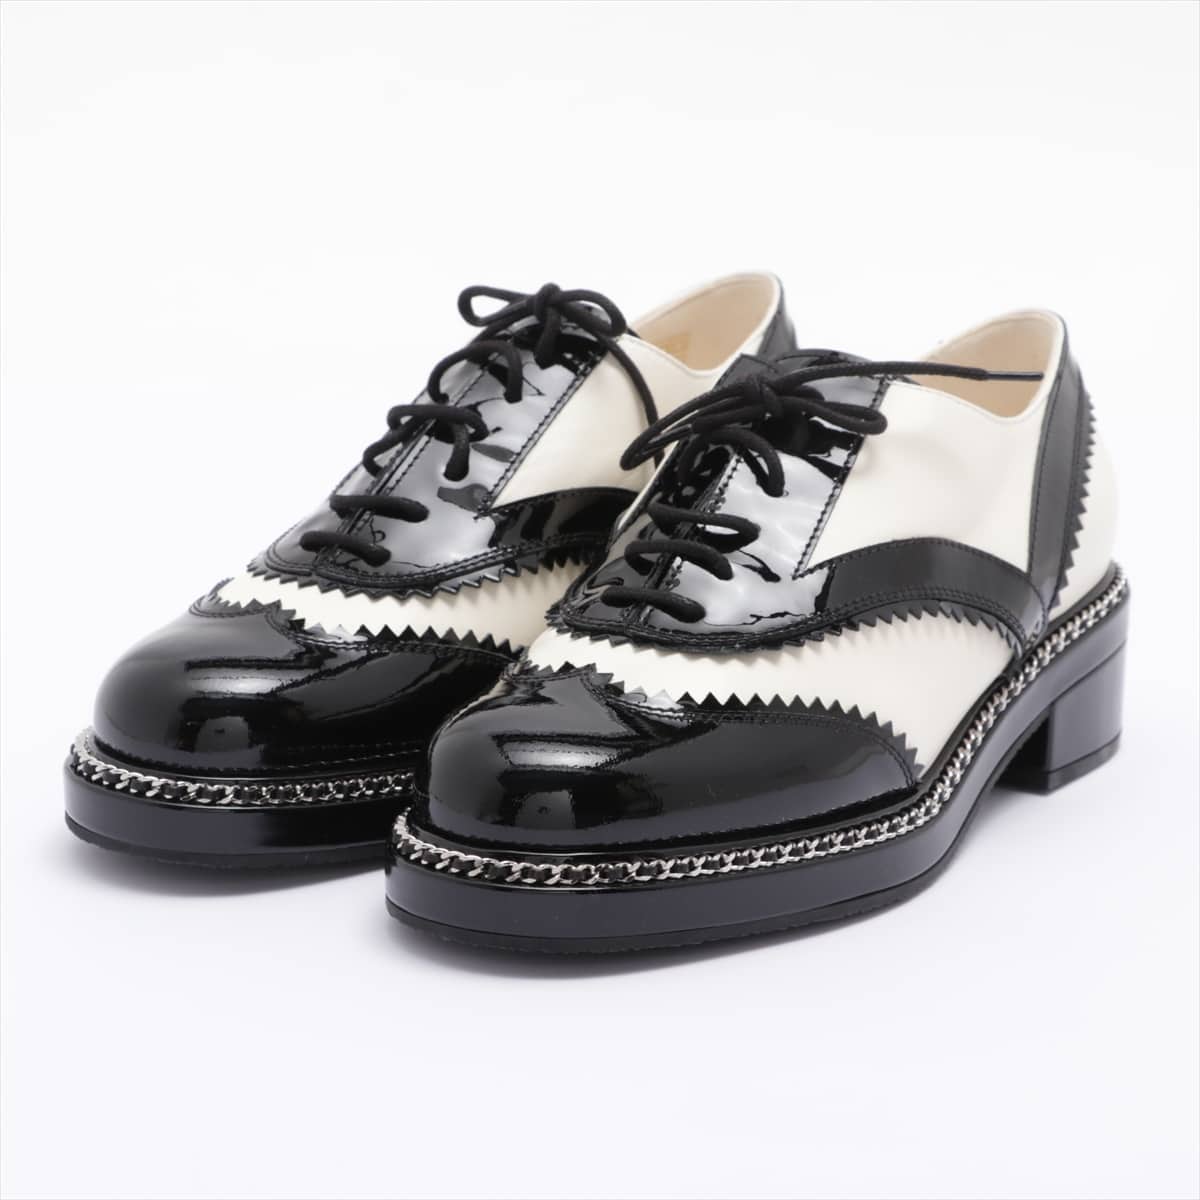 Chanel Leather & patent Dress shoes 38 Ladies' Black × White G35316 wingtip